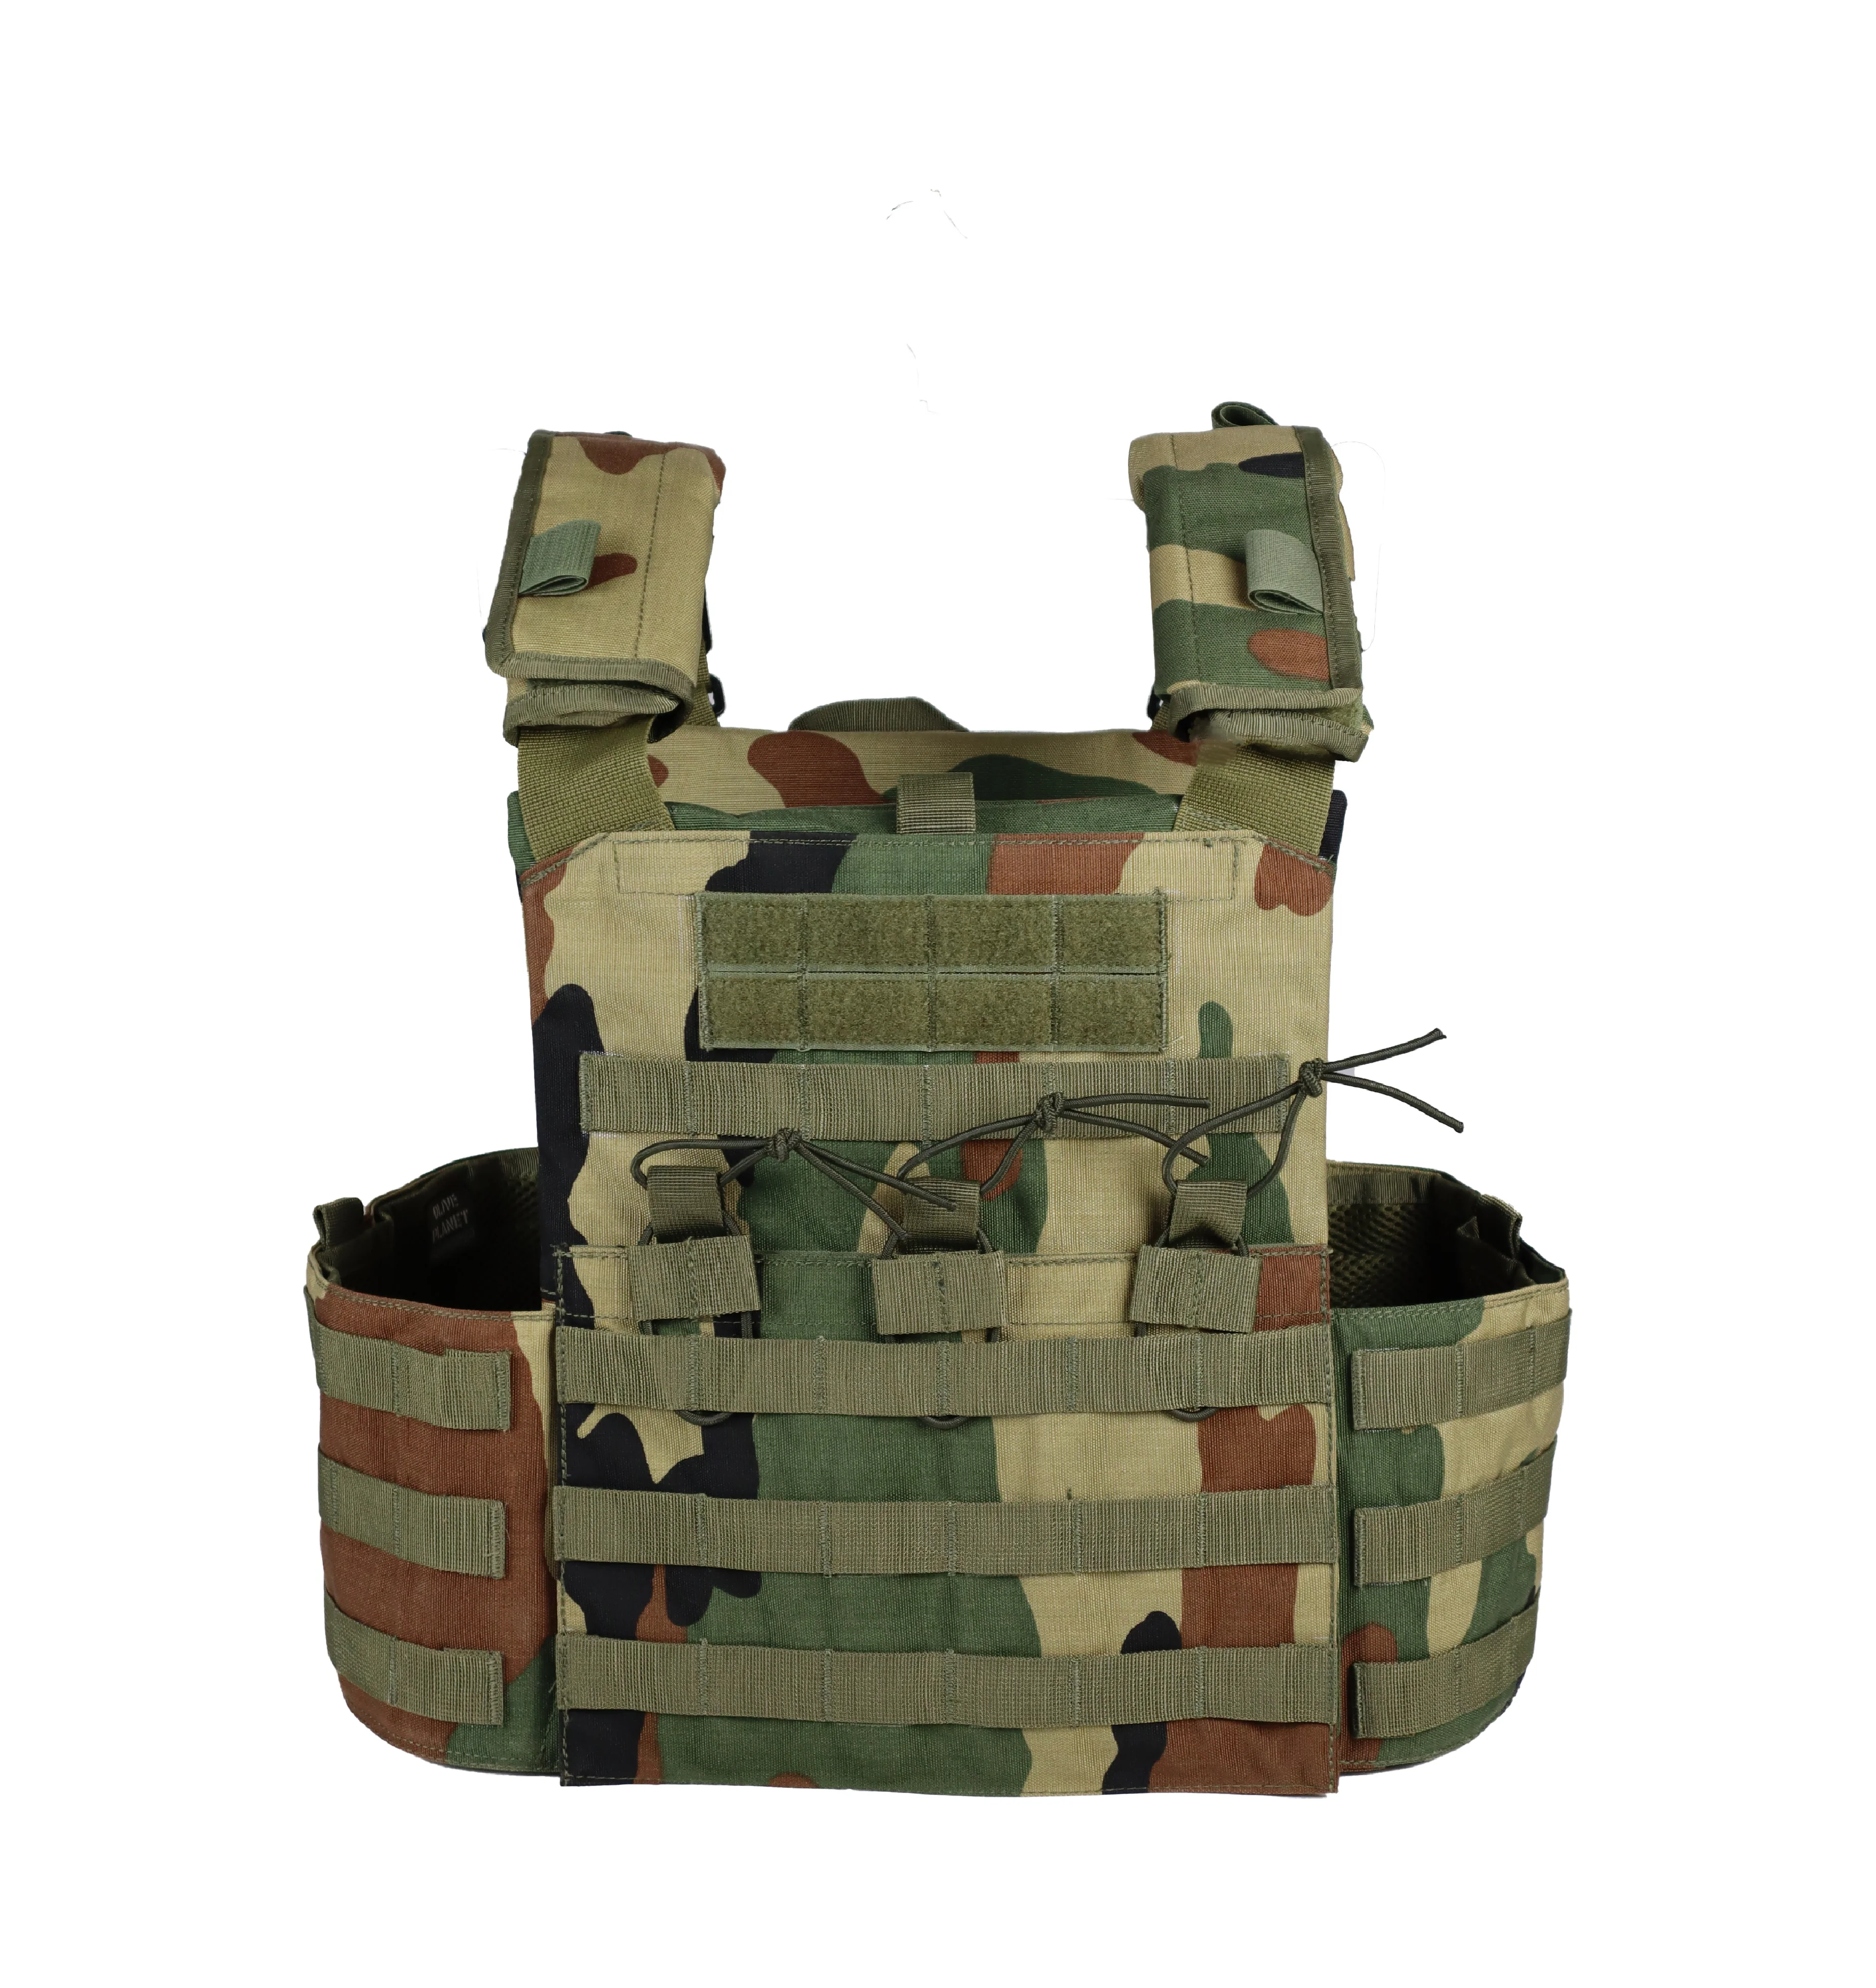 Armor Up: Exploring Plate Carriers in Canada